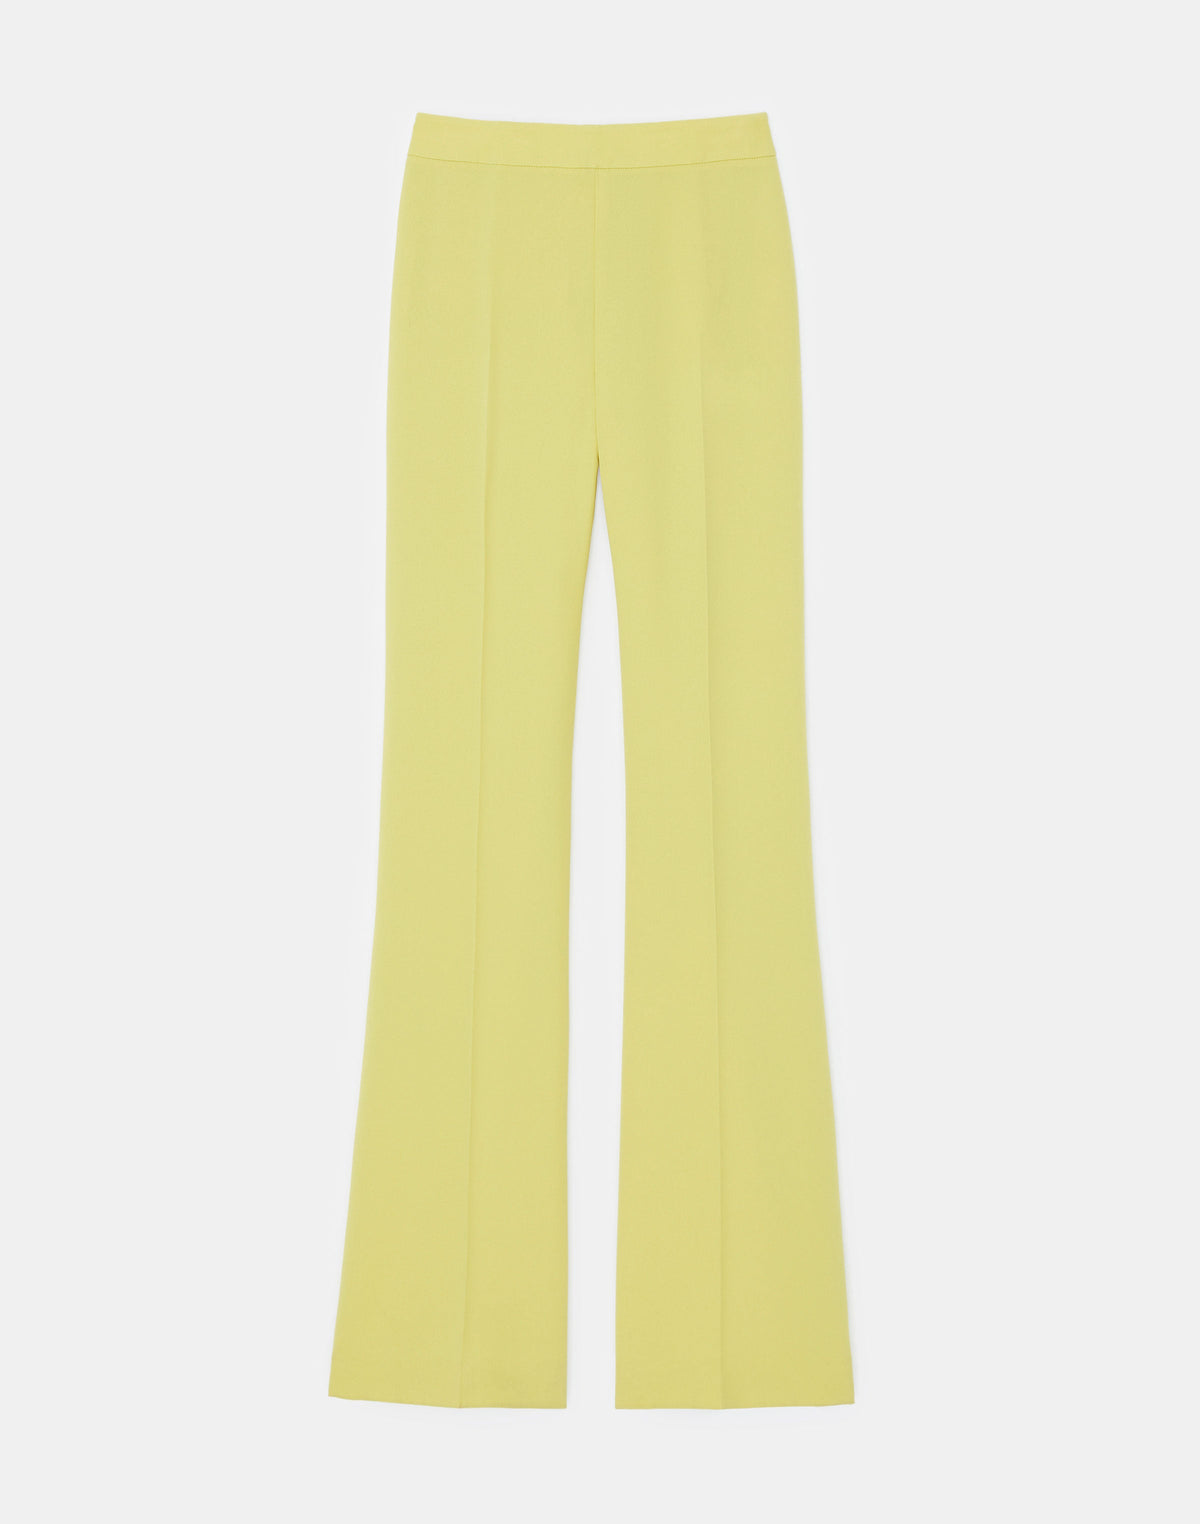 Finesse Crepe Gates Side-Zip Flared Pant LAFAYETTE 148